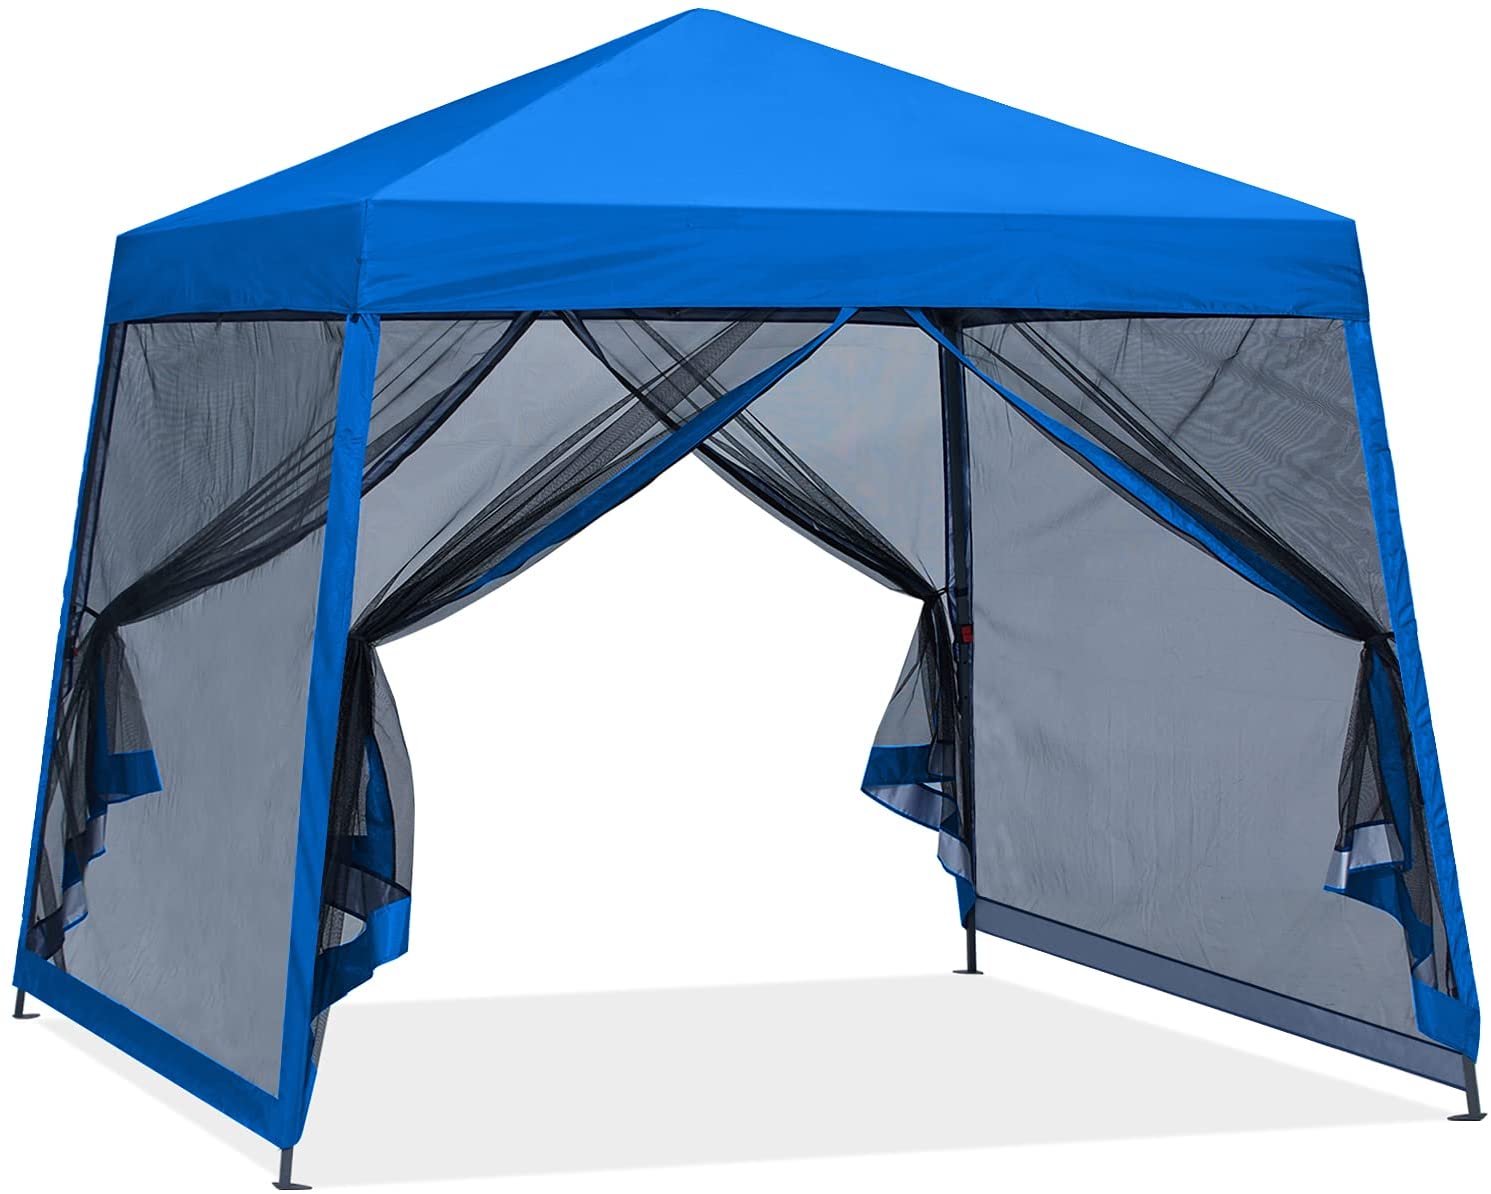 Outdoor Slant Canopy Tent with Netting Wall( 10x10 Ft / 12x12 Ft ) - ABC-CANOPY